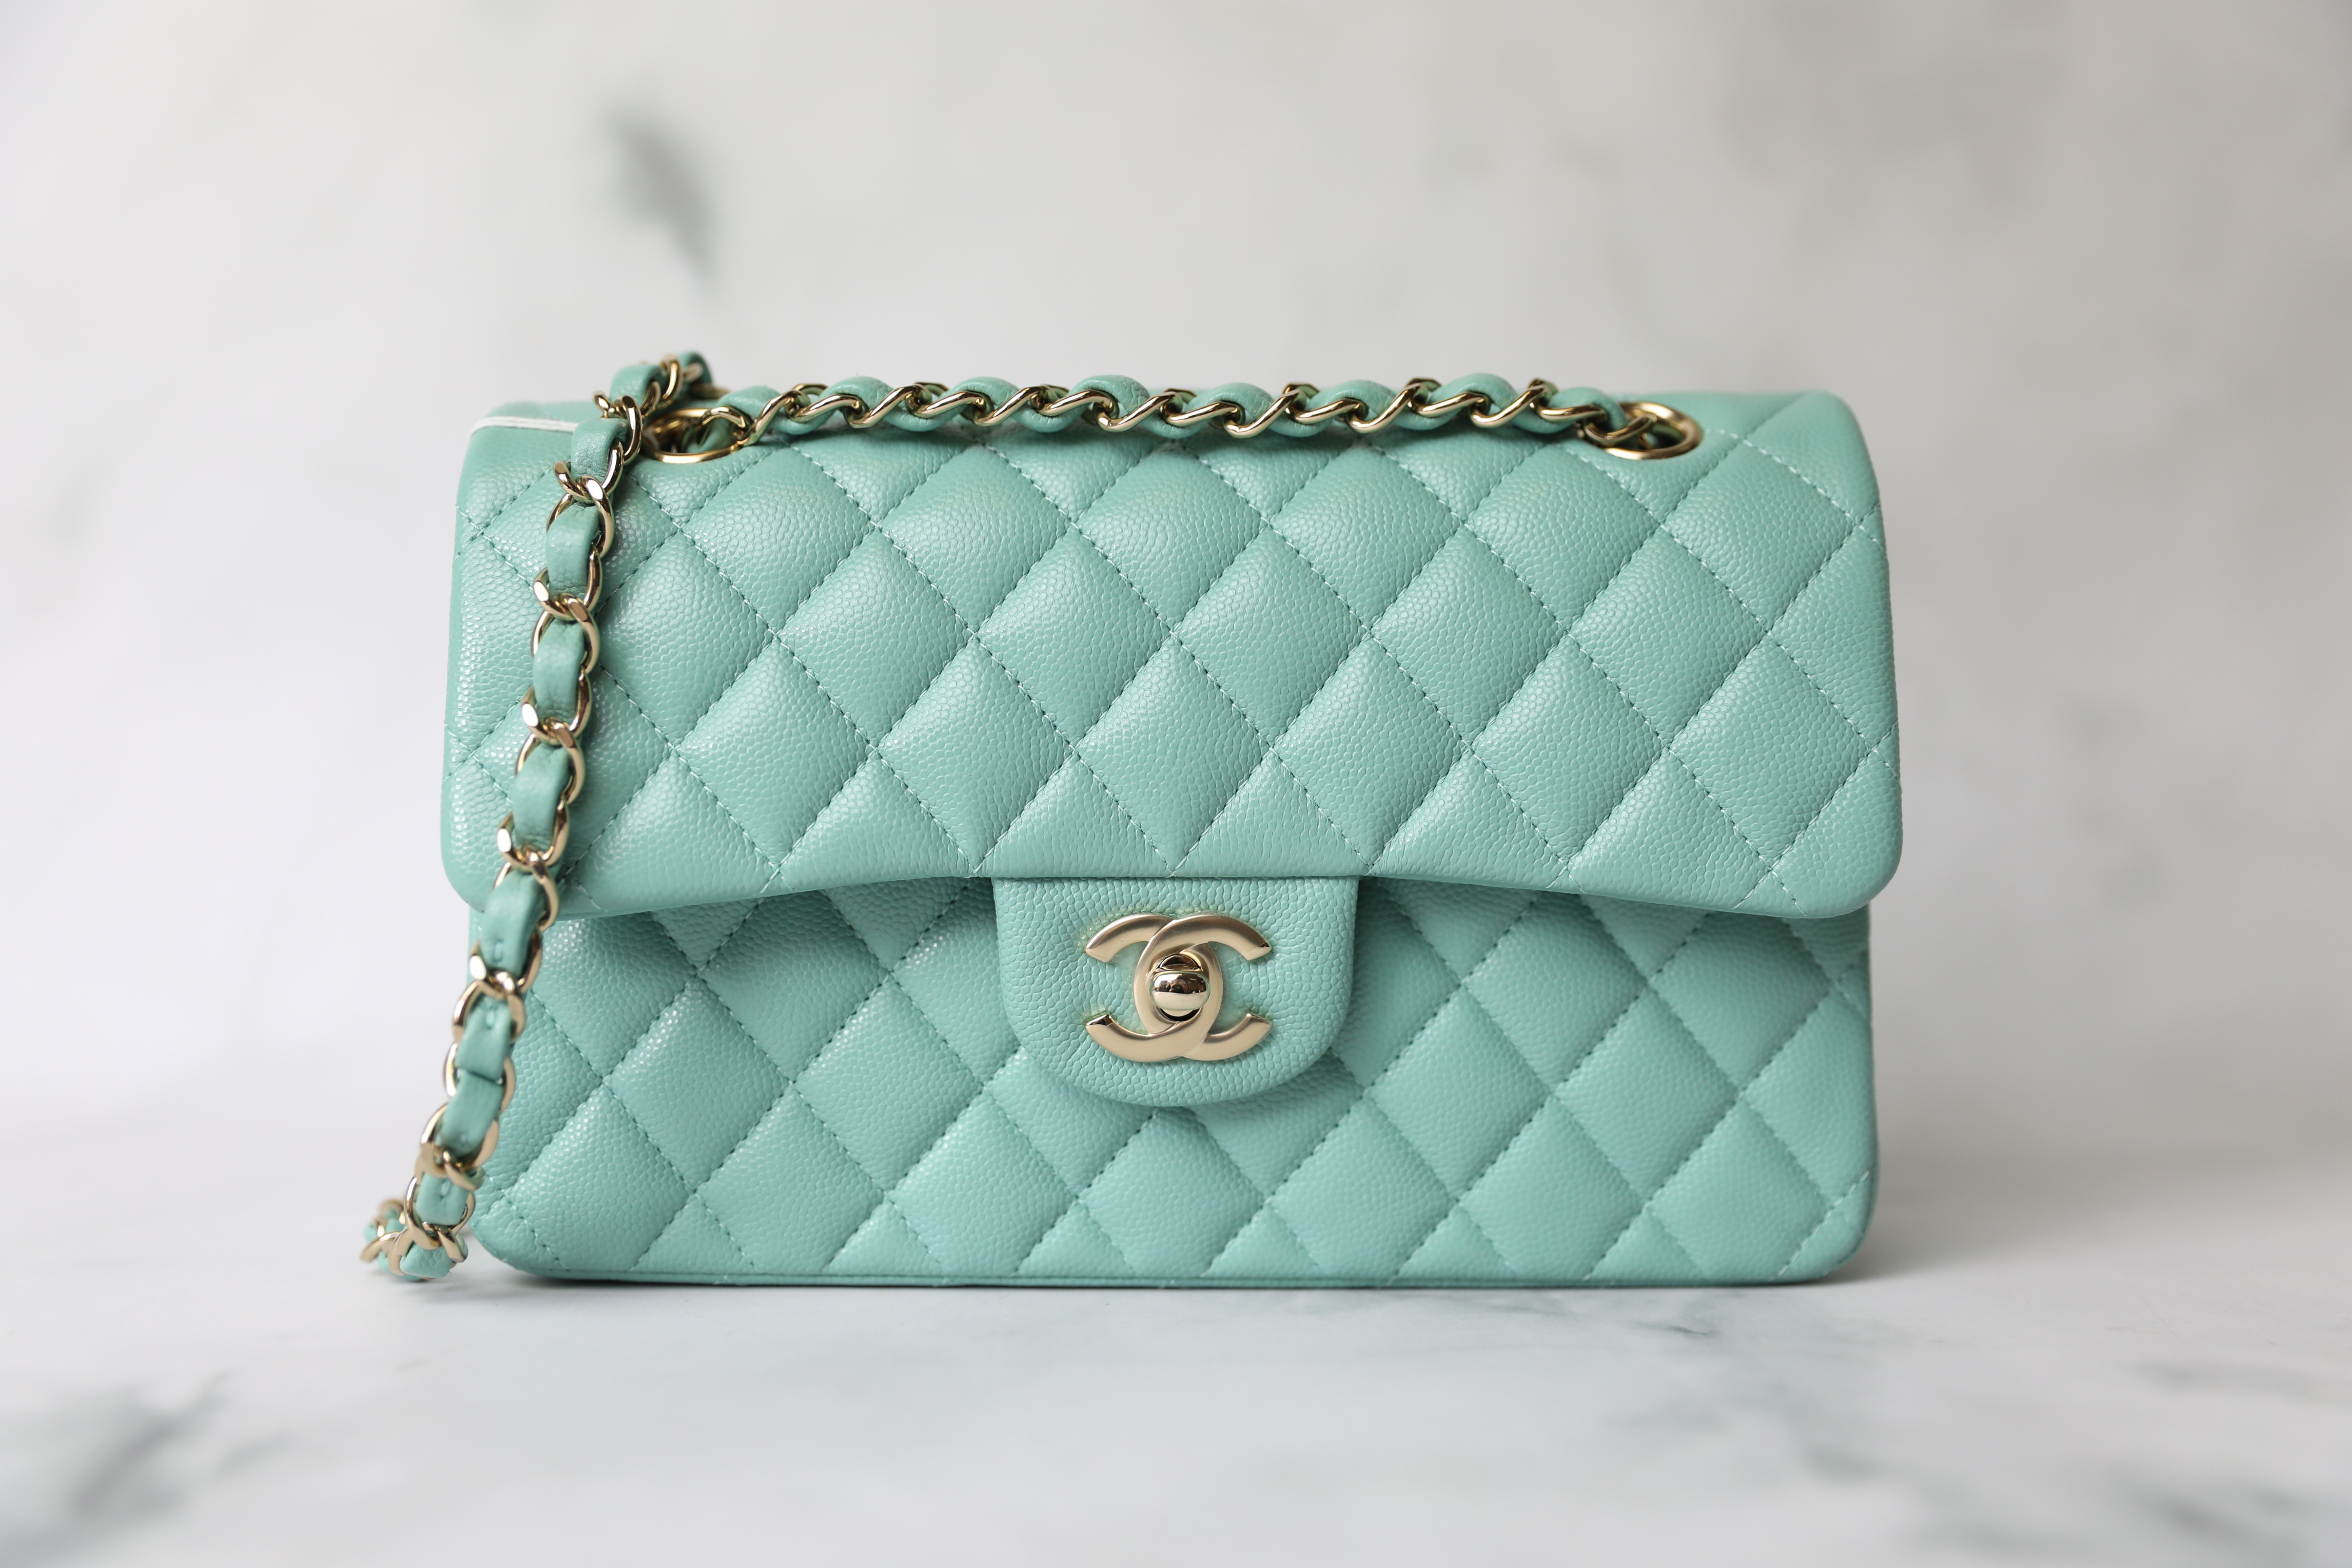 Chanel Classic Small, 21S Tiffany Blue Caviar with Gold Hardware